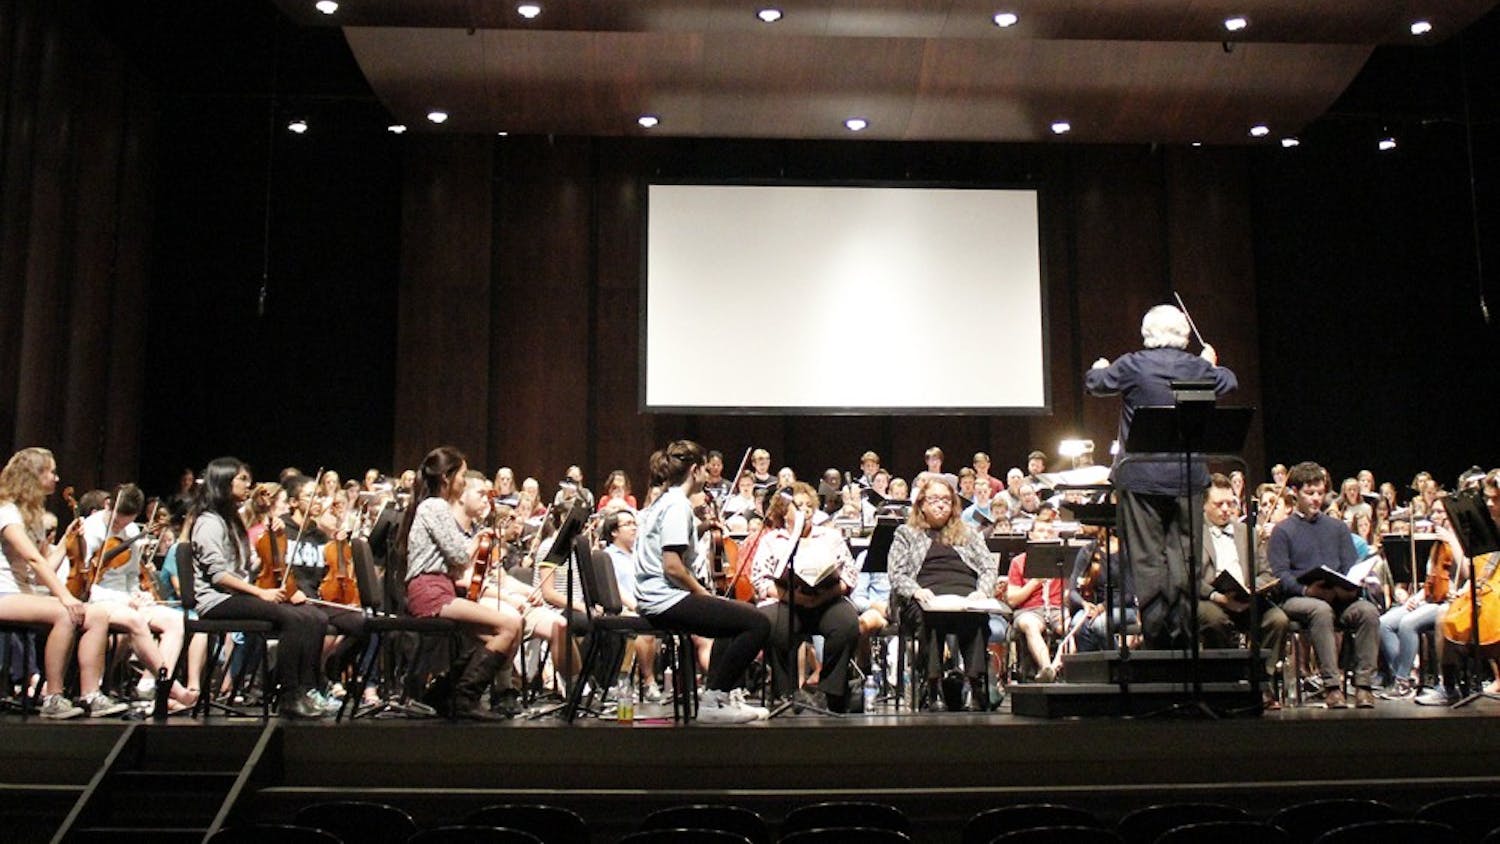 UNC’s Music and Jewish studies departments will perform “The Defiant Requiem” on Thursday at 8:00 p.m.  The requiem was also performed by prisoners at a concentration camp.